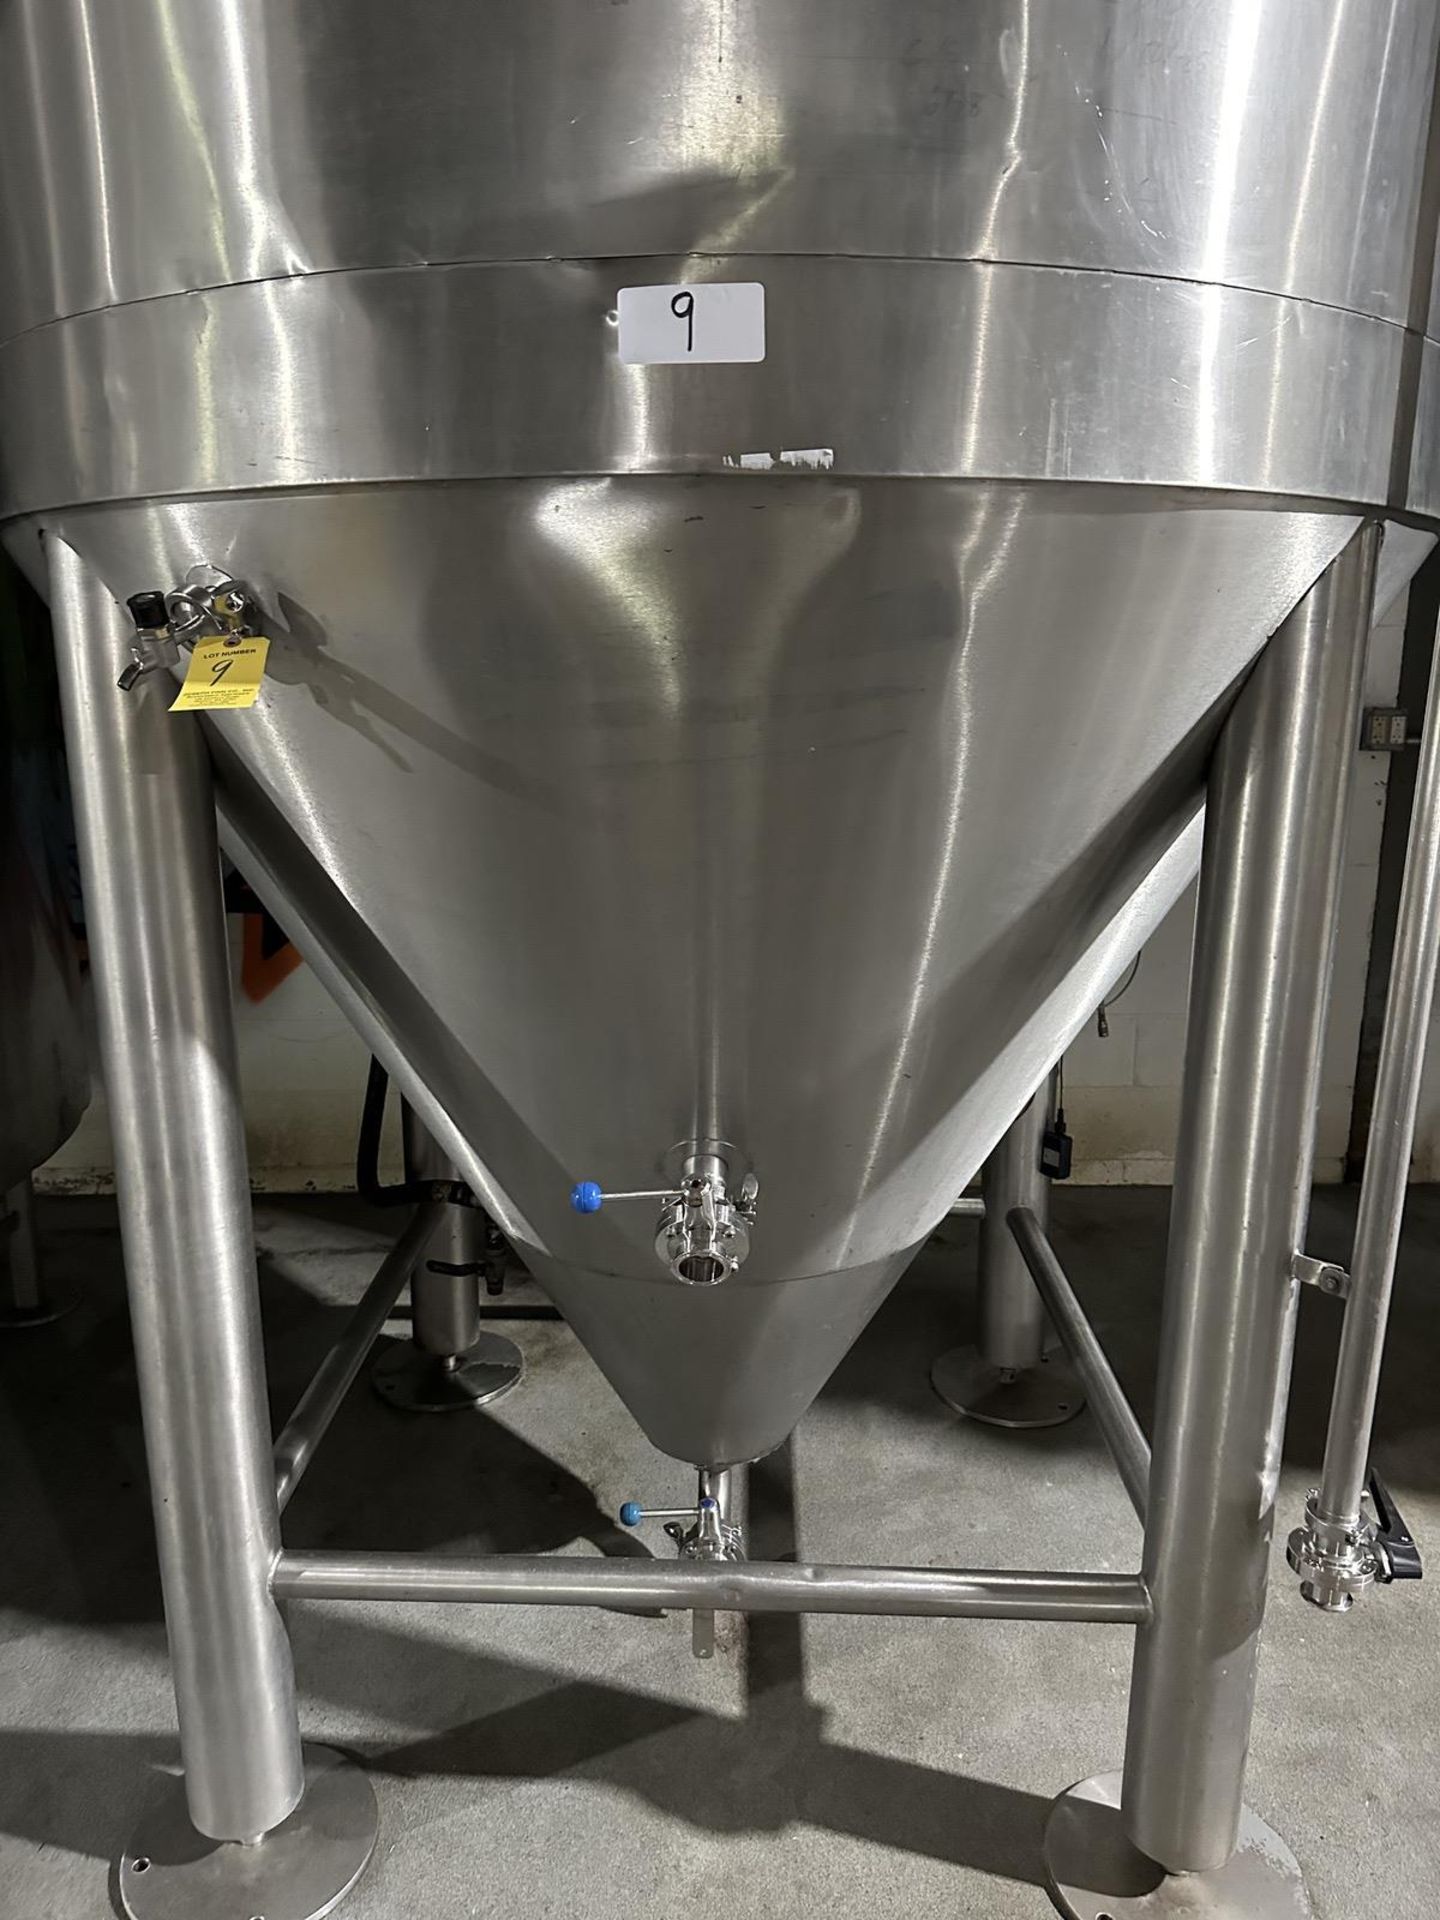 Approx. 30 BBL Stainless Steel Fermenter, Glycol Jacketed | Rig Fee $350 - Image 2 of 3